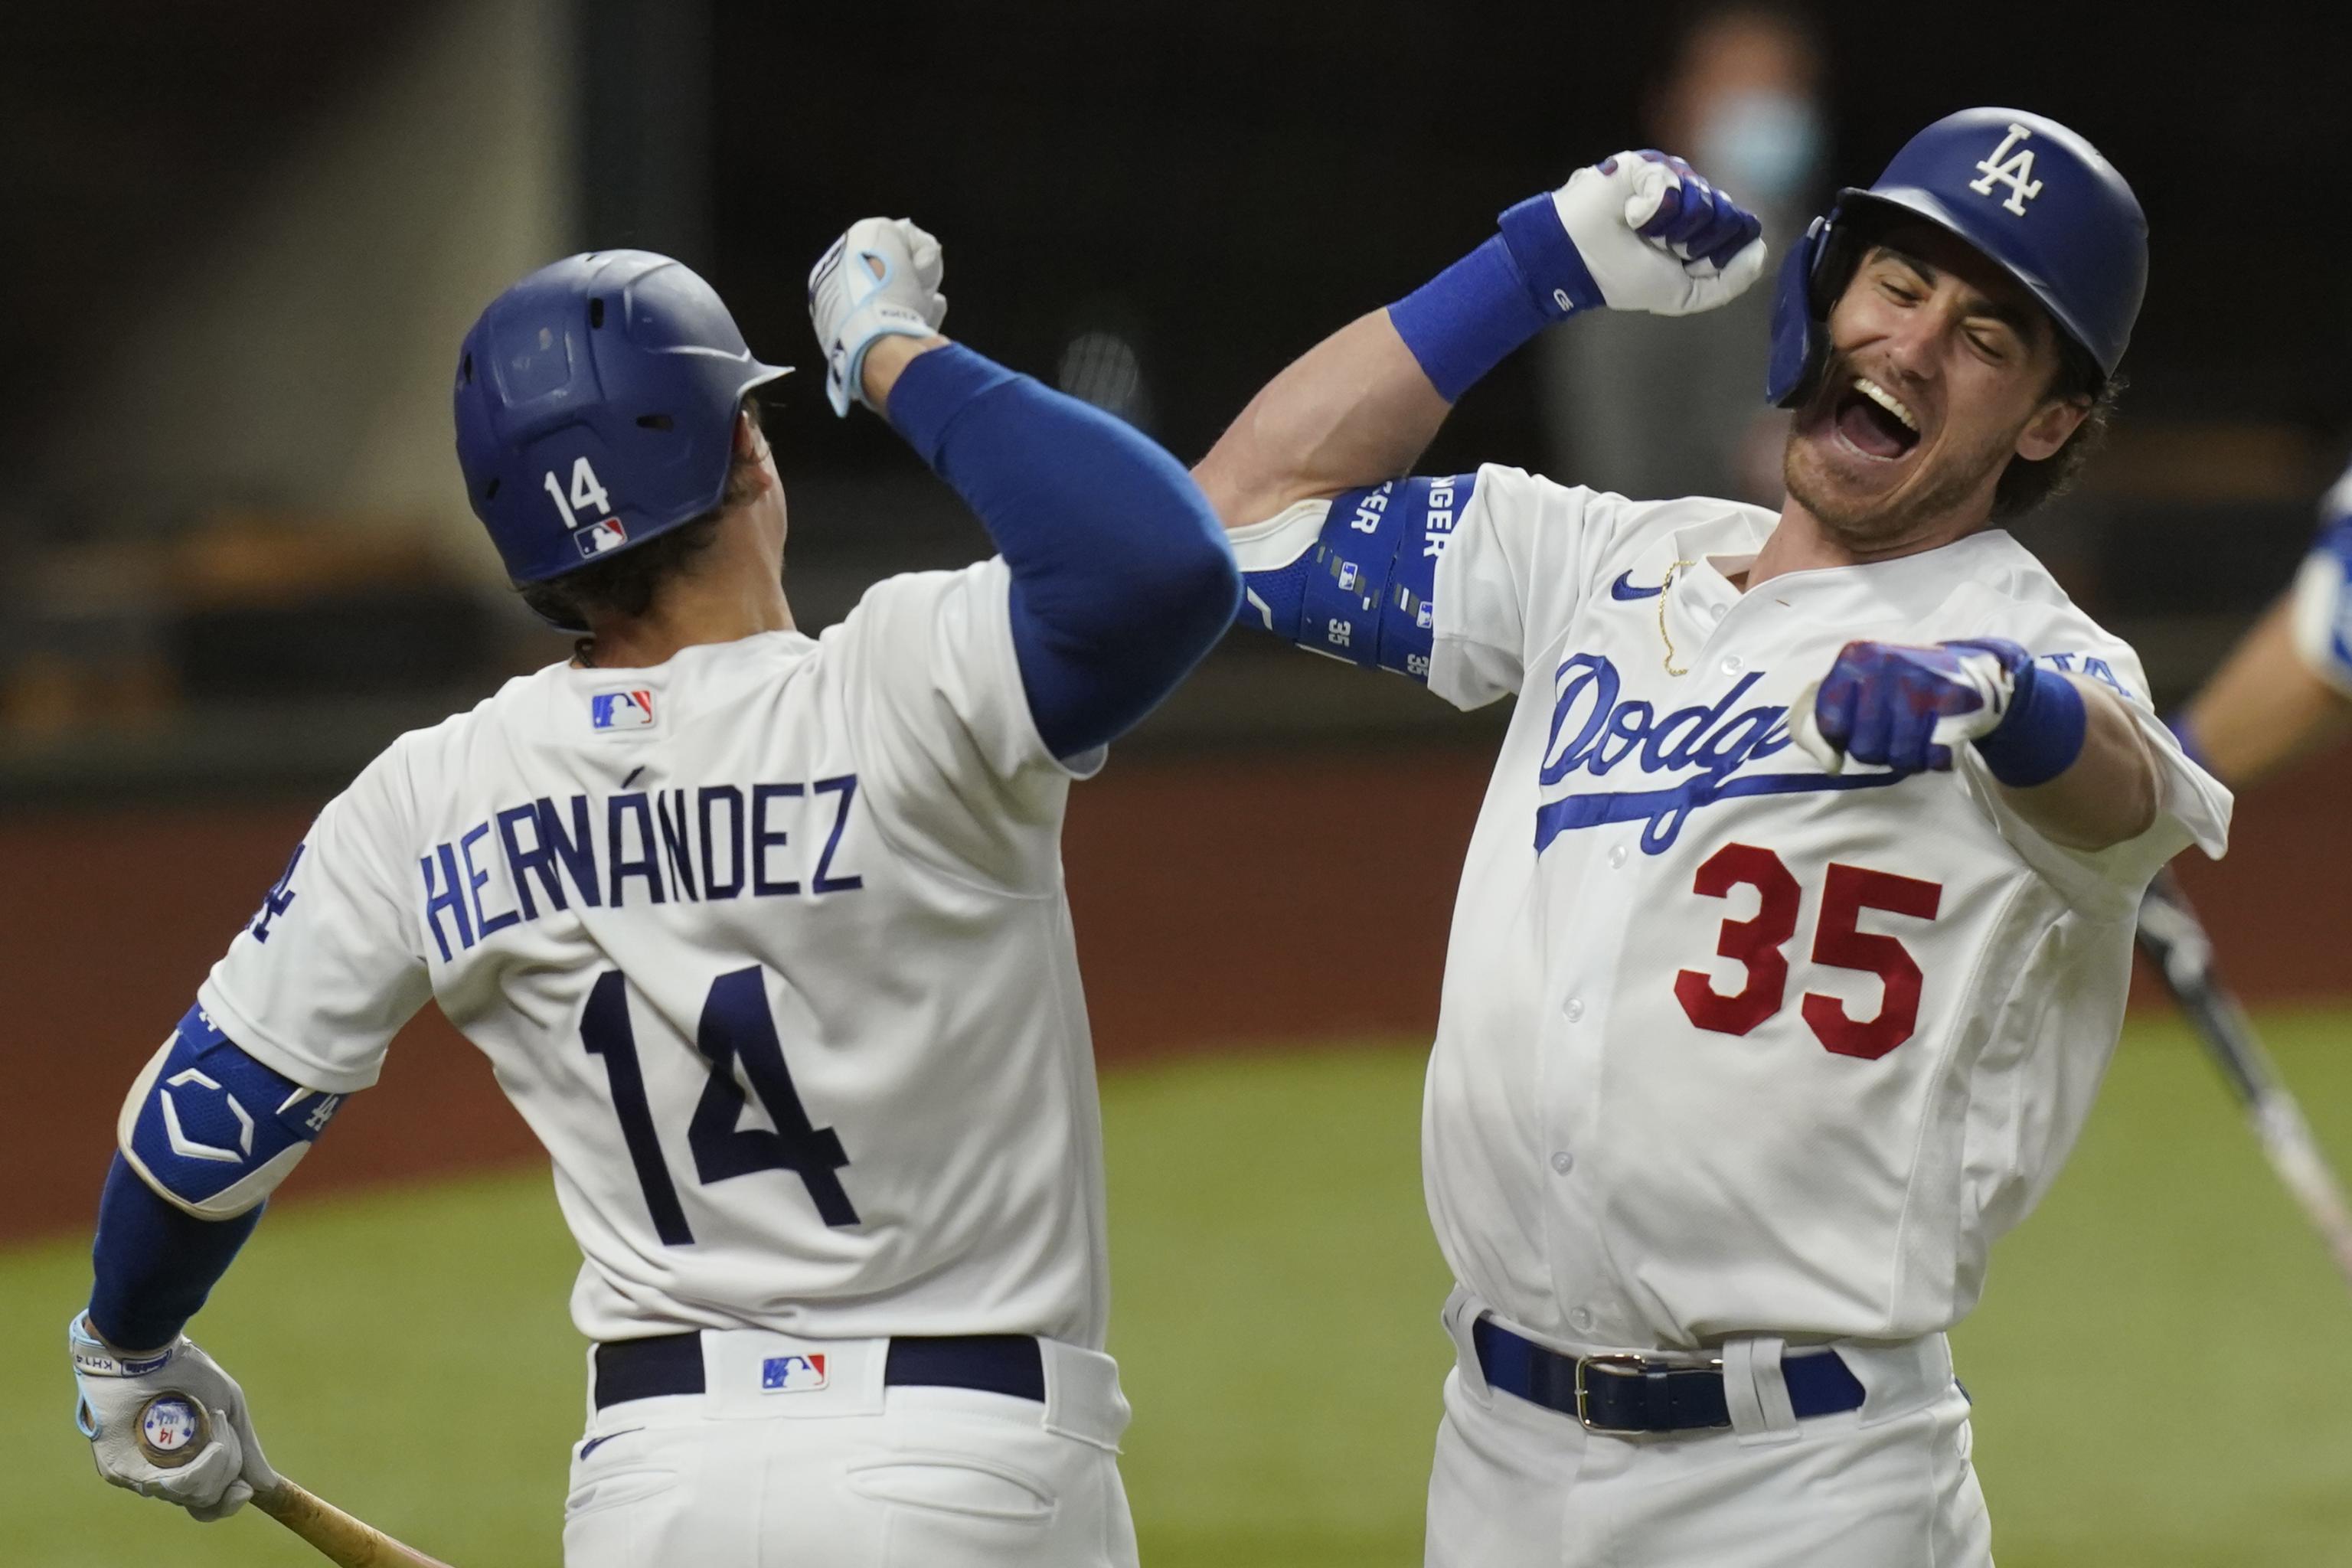 Dodgers May Celebrate West Championship, But What About A World